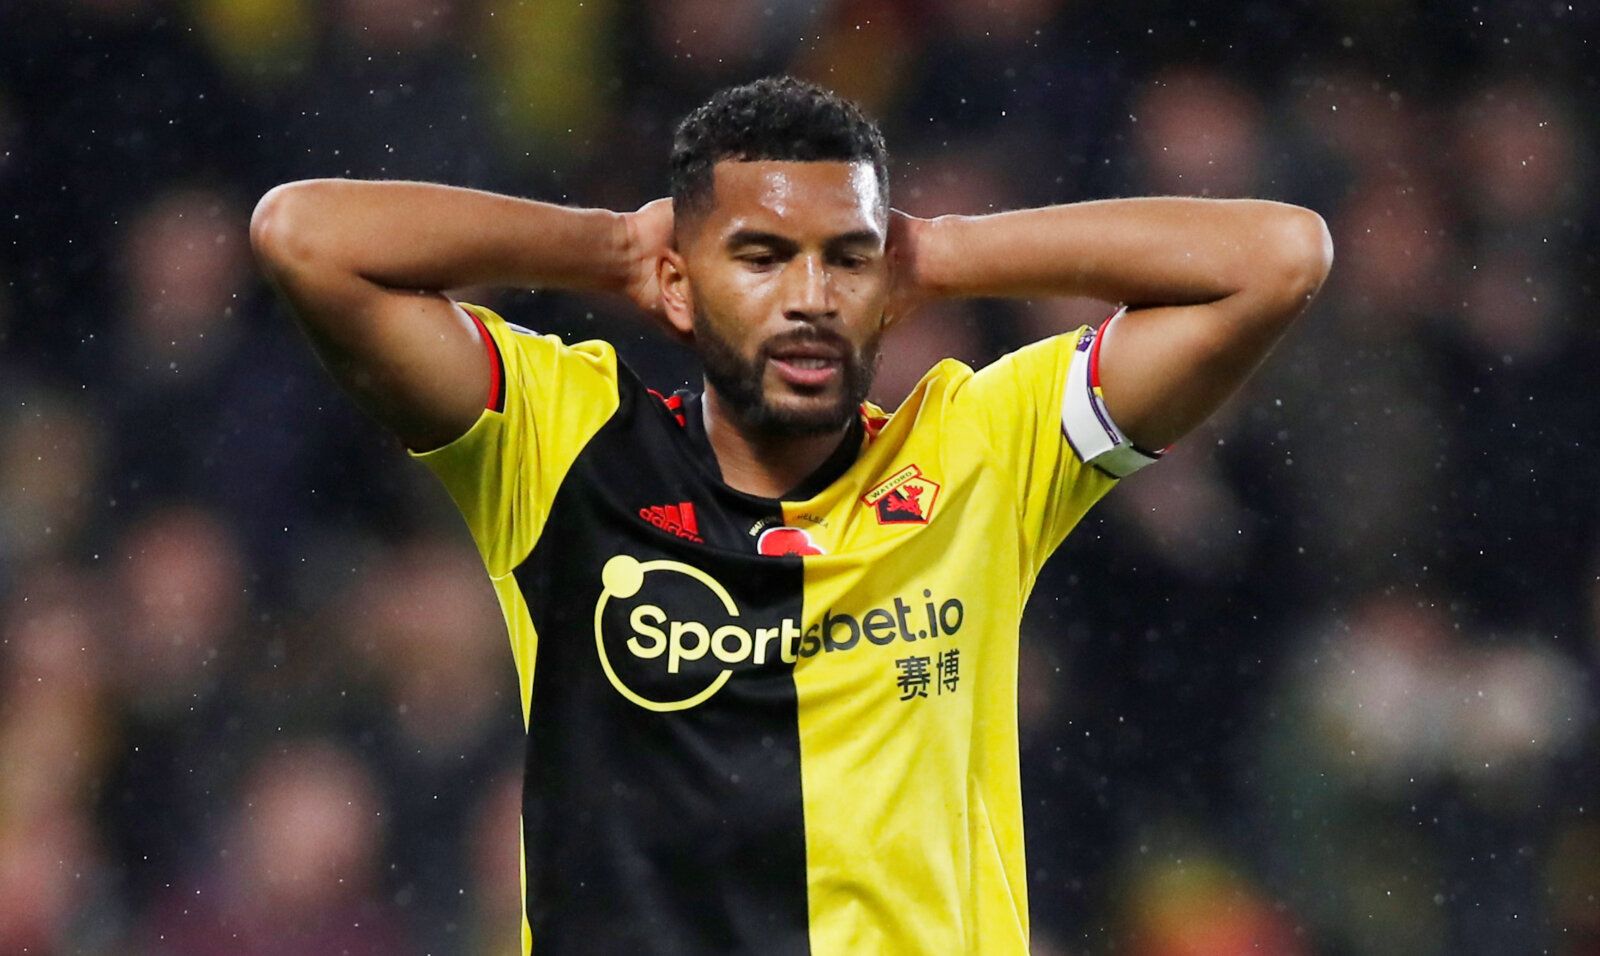 Soccer Football - Premier League - Watford v Chelsea - Vicarage Road, Watford, Britain - November 2, 2019  Watford's Adrian Mariappa looks dejected   Action Images via Reuters/Andrew Boyers  EDITORIAL USE ONLY. No use with unauthorized audio, video, data, fixture lists, club/league logos or 